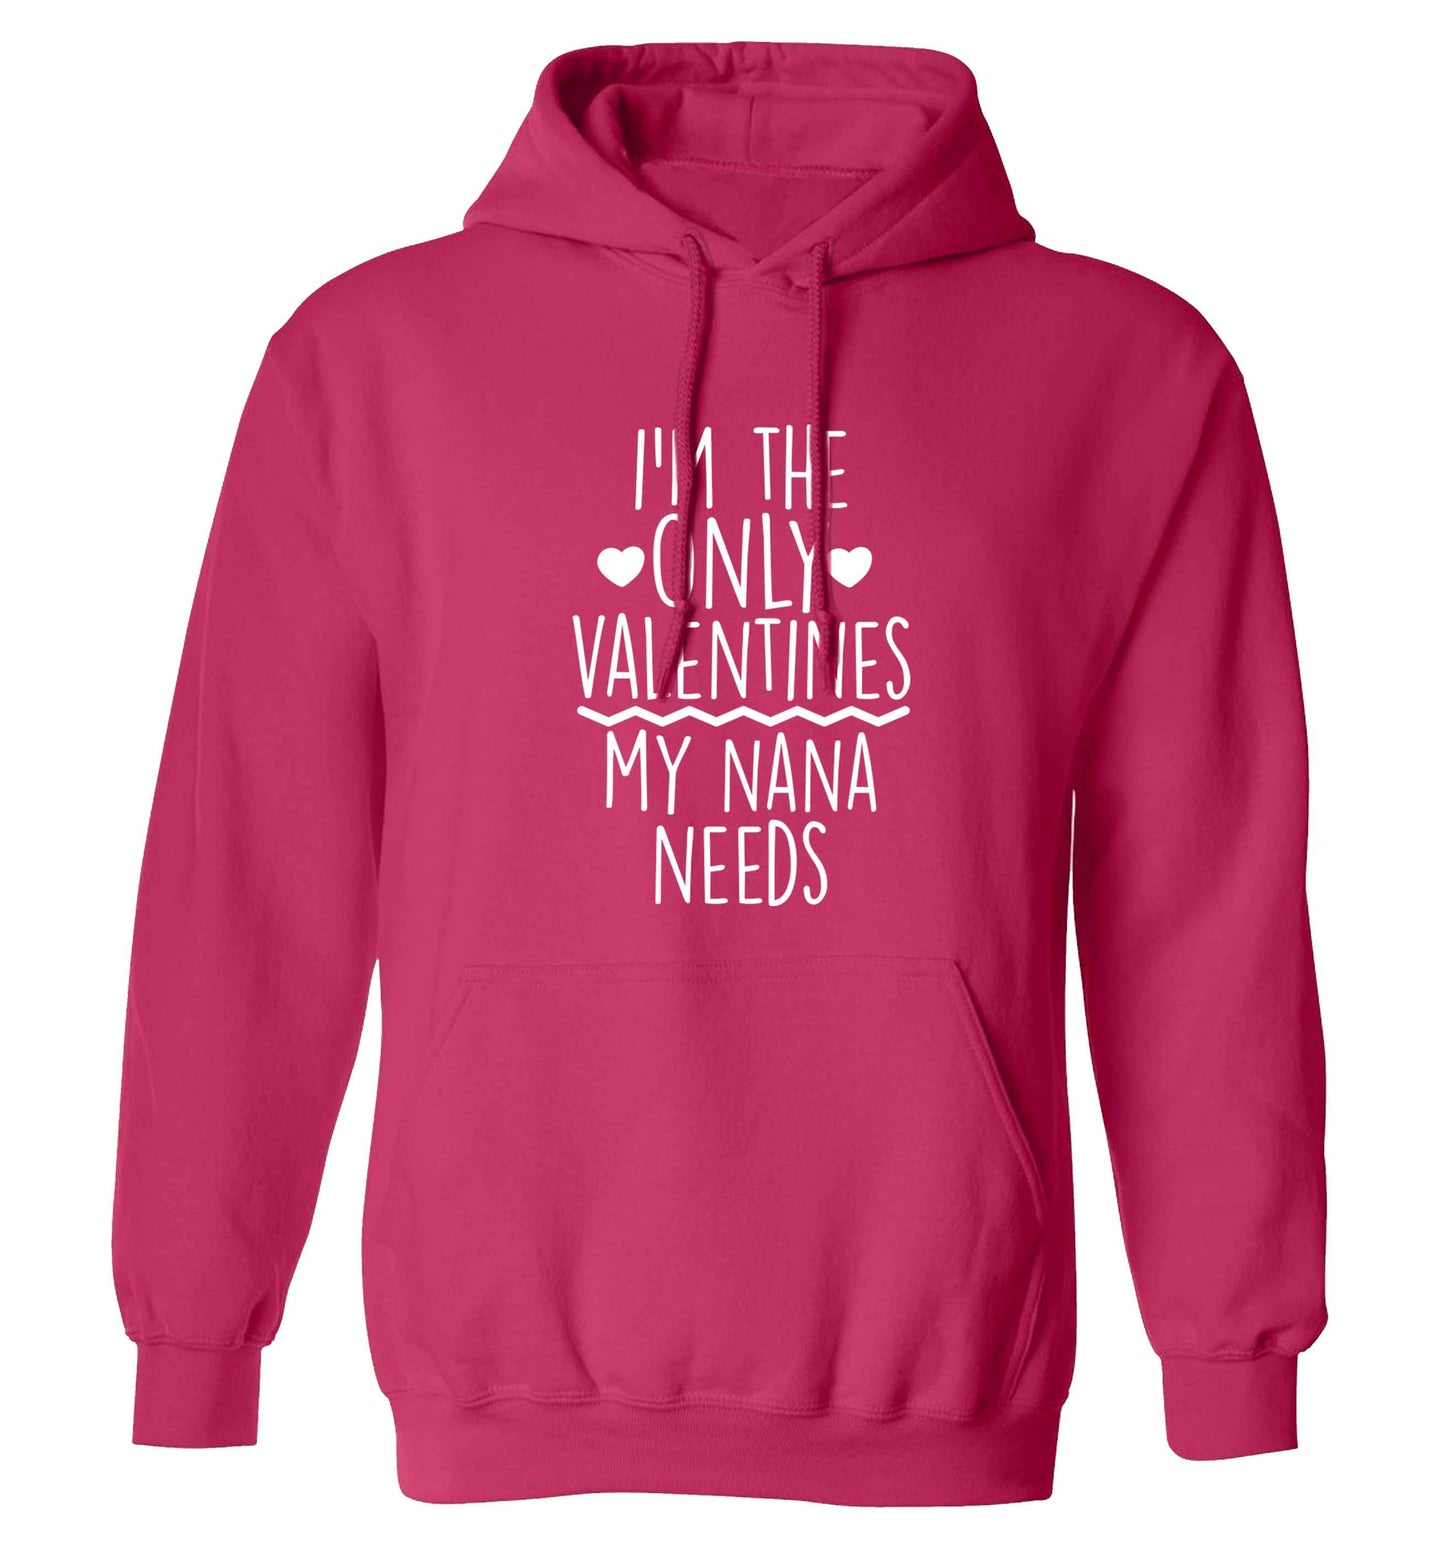 I'm the only valentines my nana needs adults unisex pink hoodie 2XL